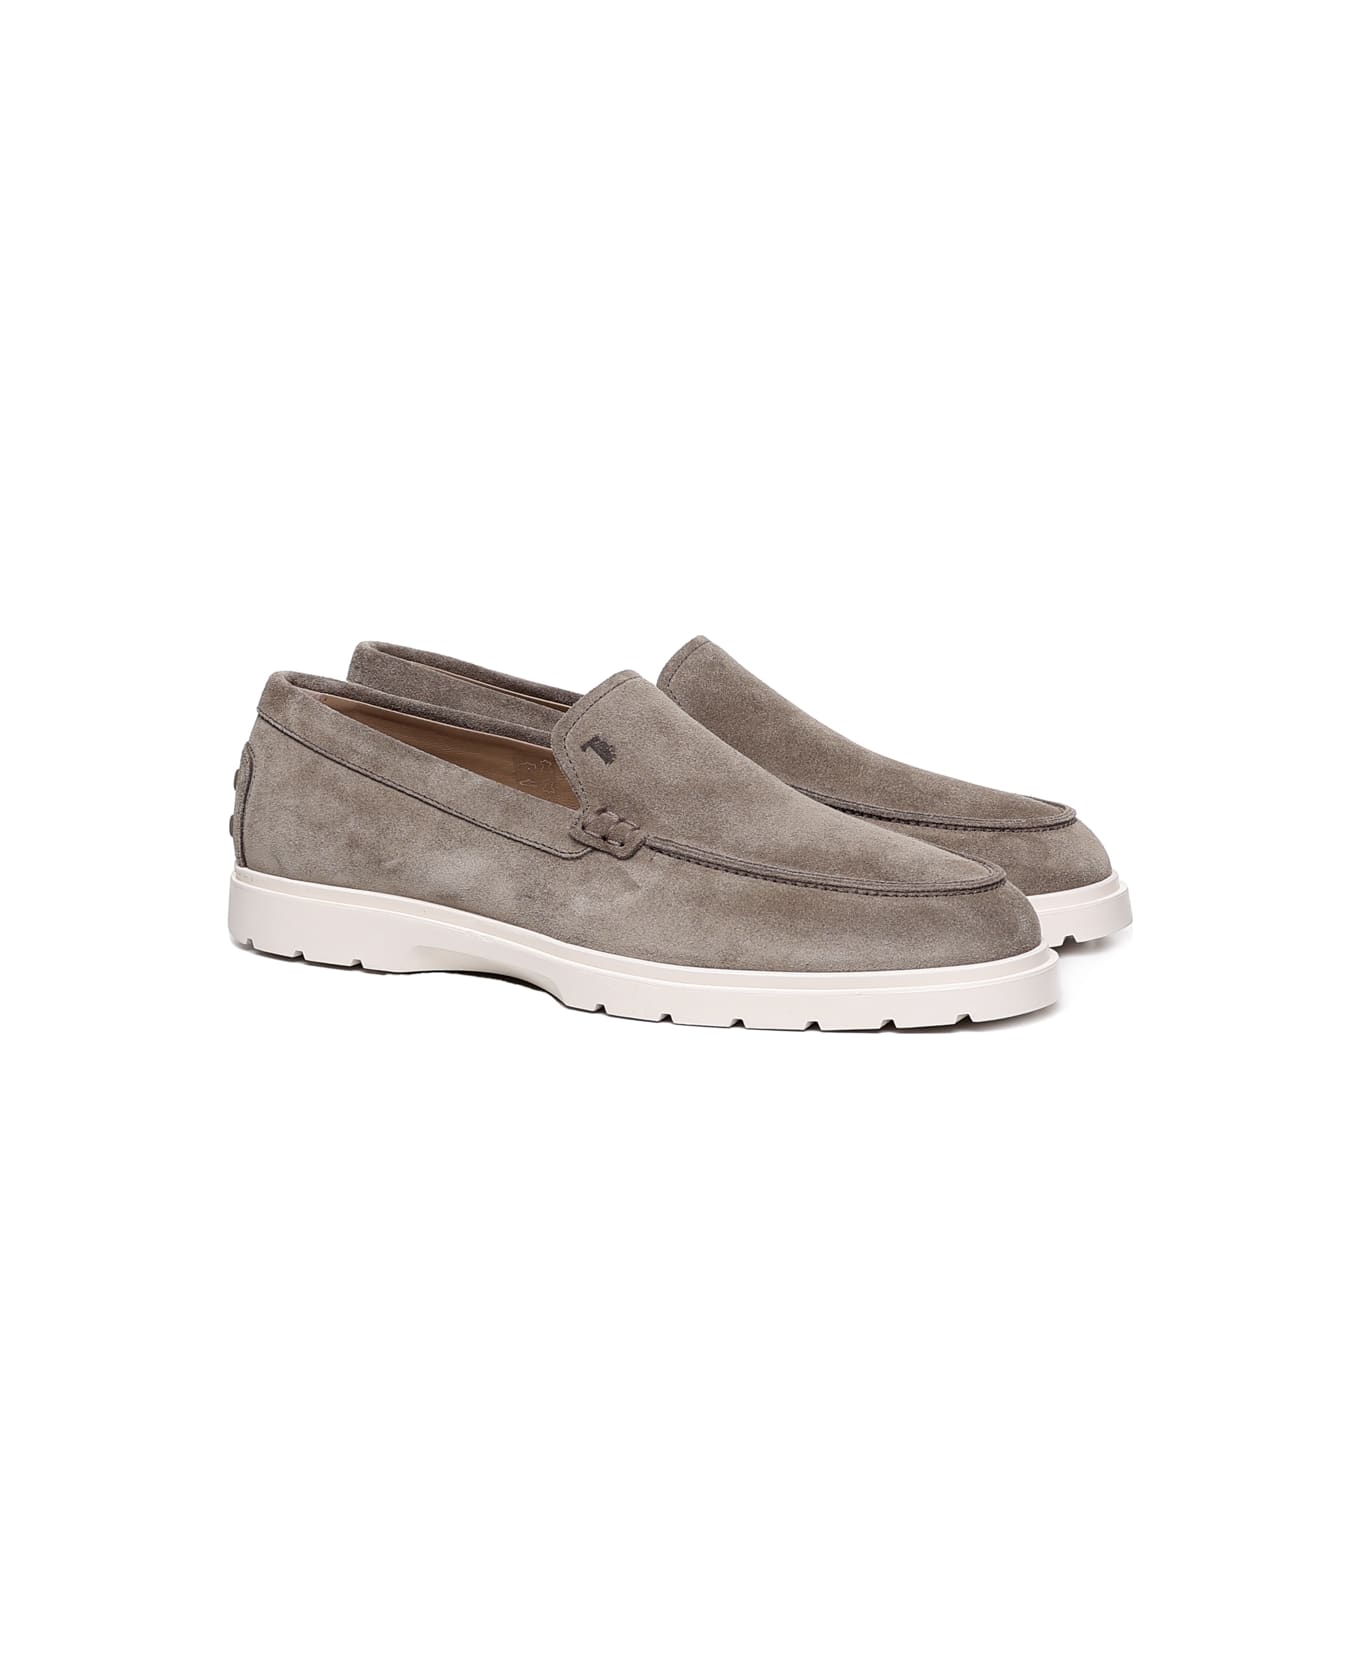 Tod's Suede Slipper Moccasin - TORBA